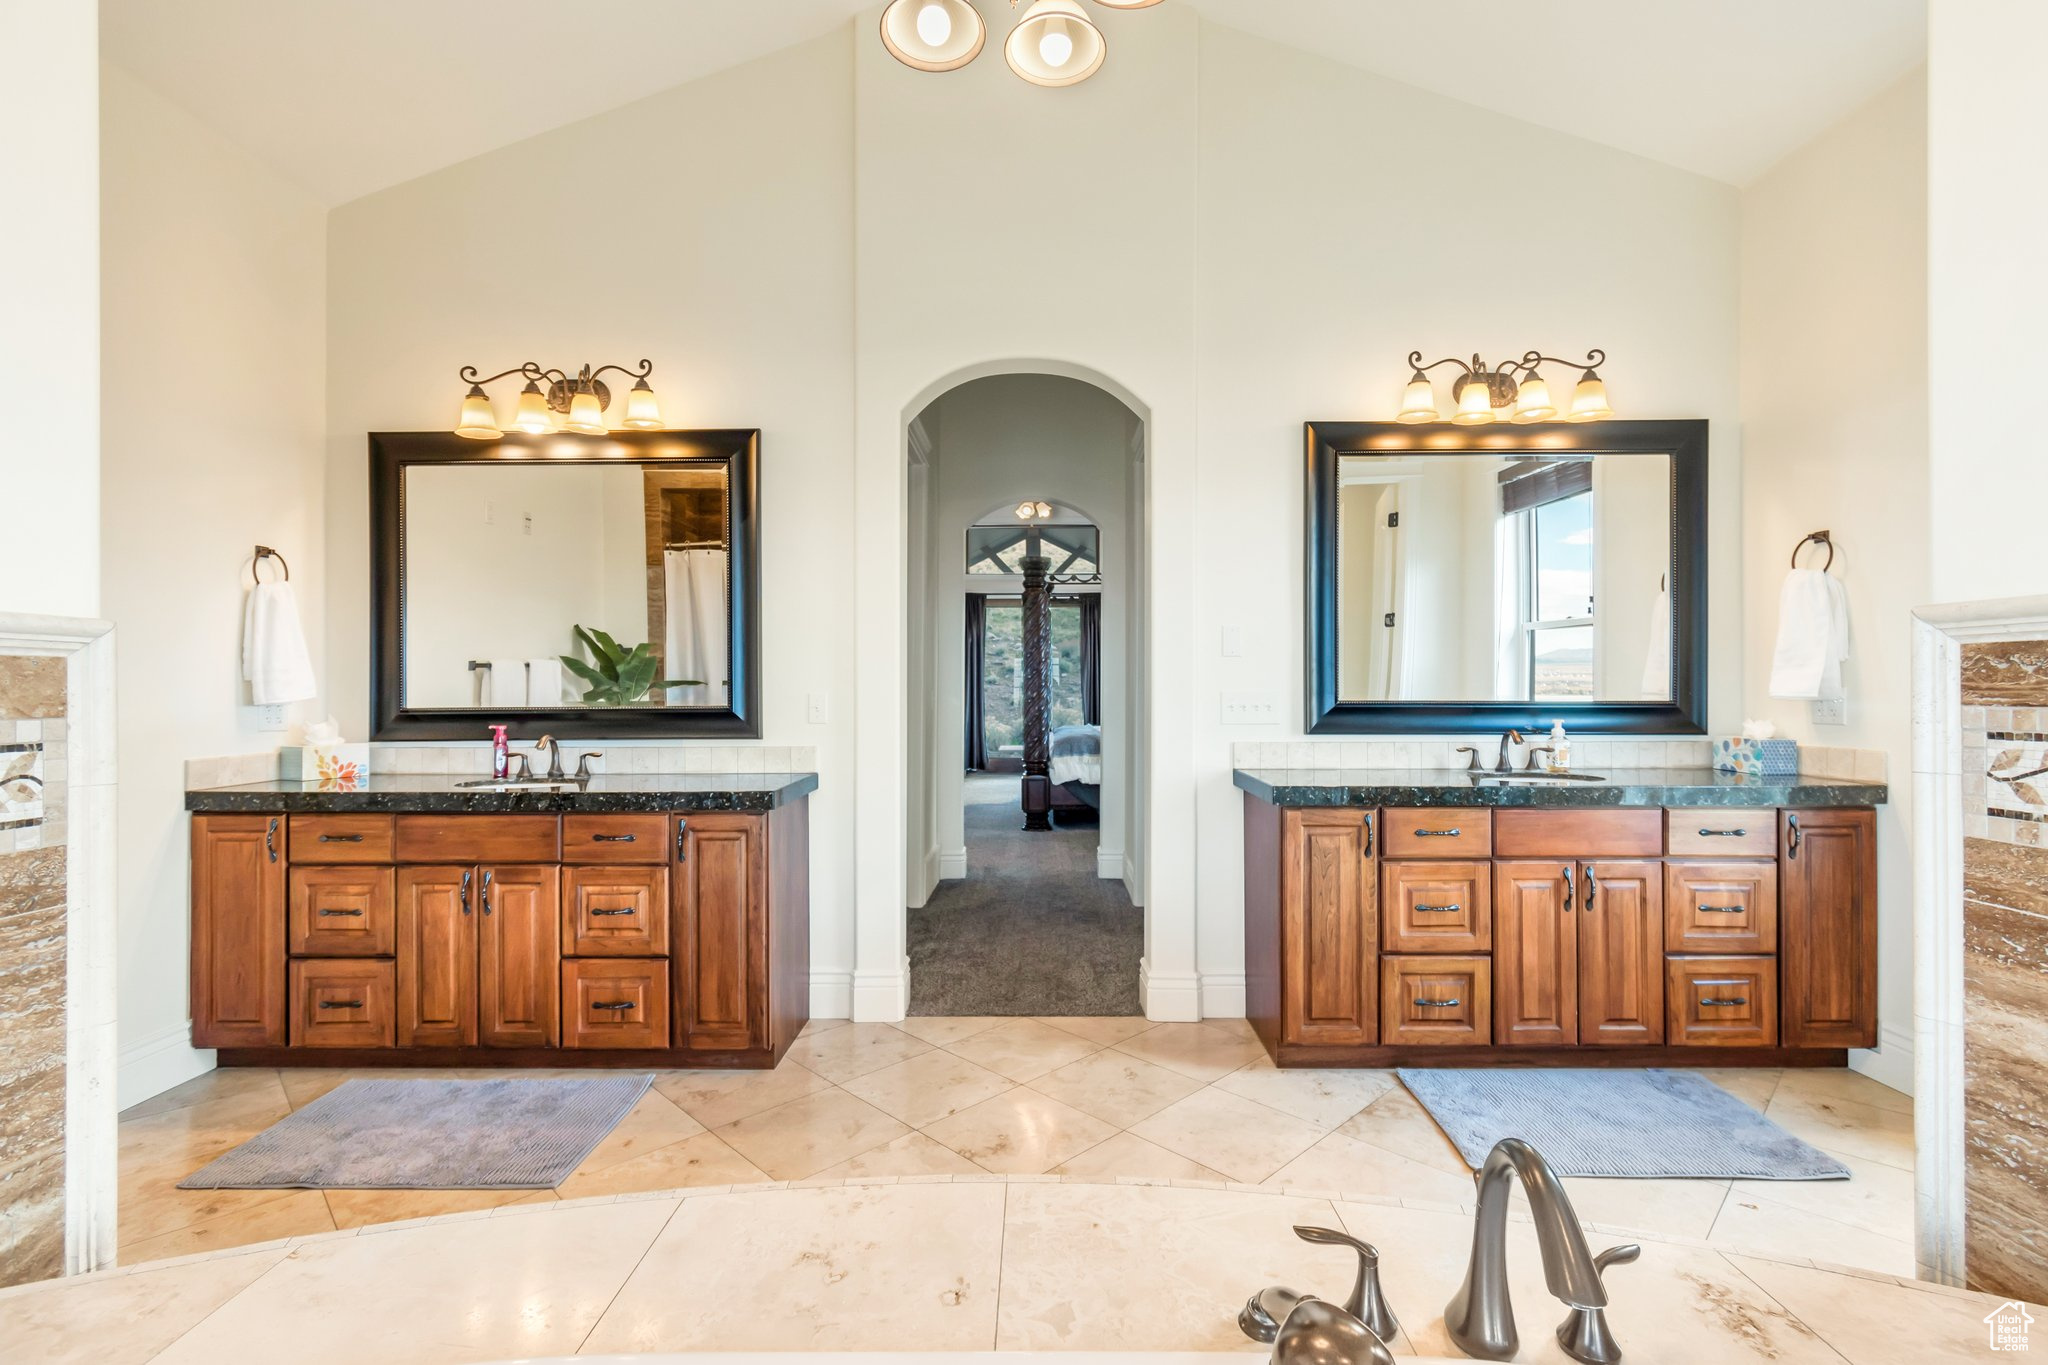 Bathroom featuring high vaulted ceiling, dual bowl vanity, and tile flooring